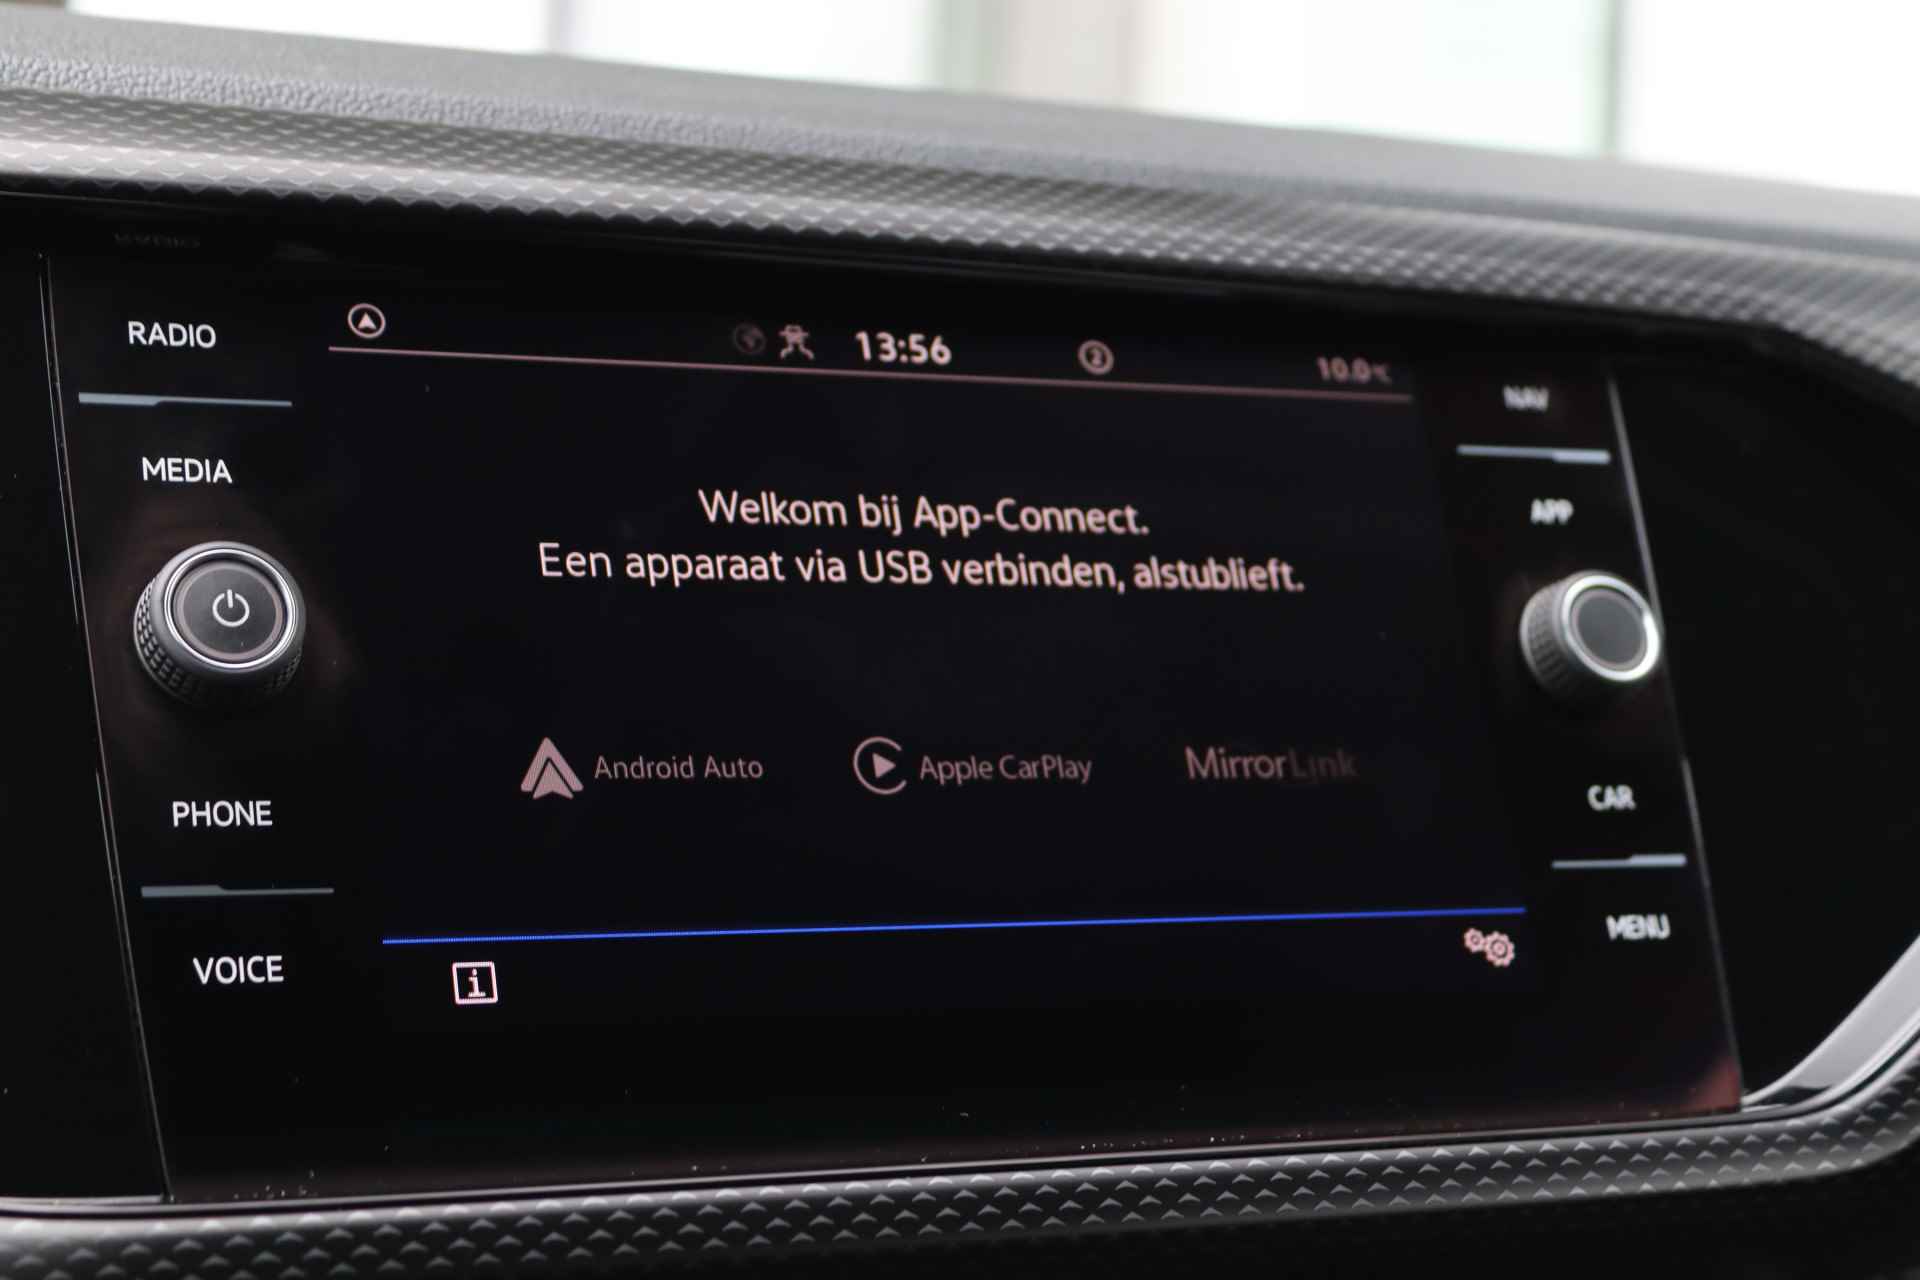 Volkswagen T-Cross 1.0 TSI 95 pk Life | App-connect  | PDC voor & achter | 16" LM | Adaptive Cruise - 26/38